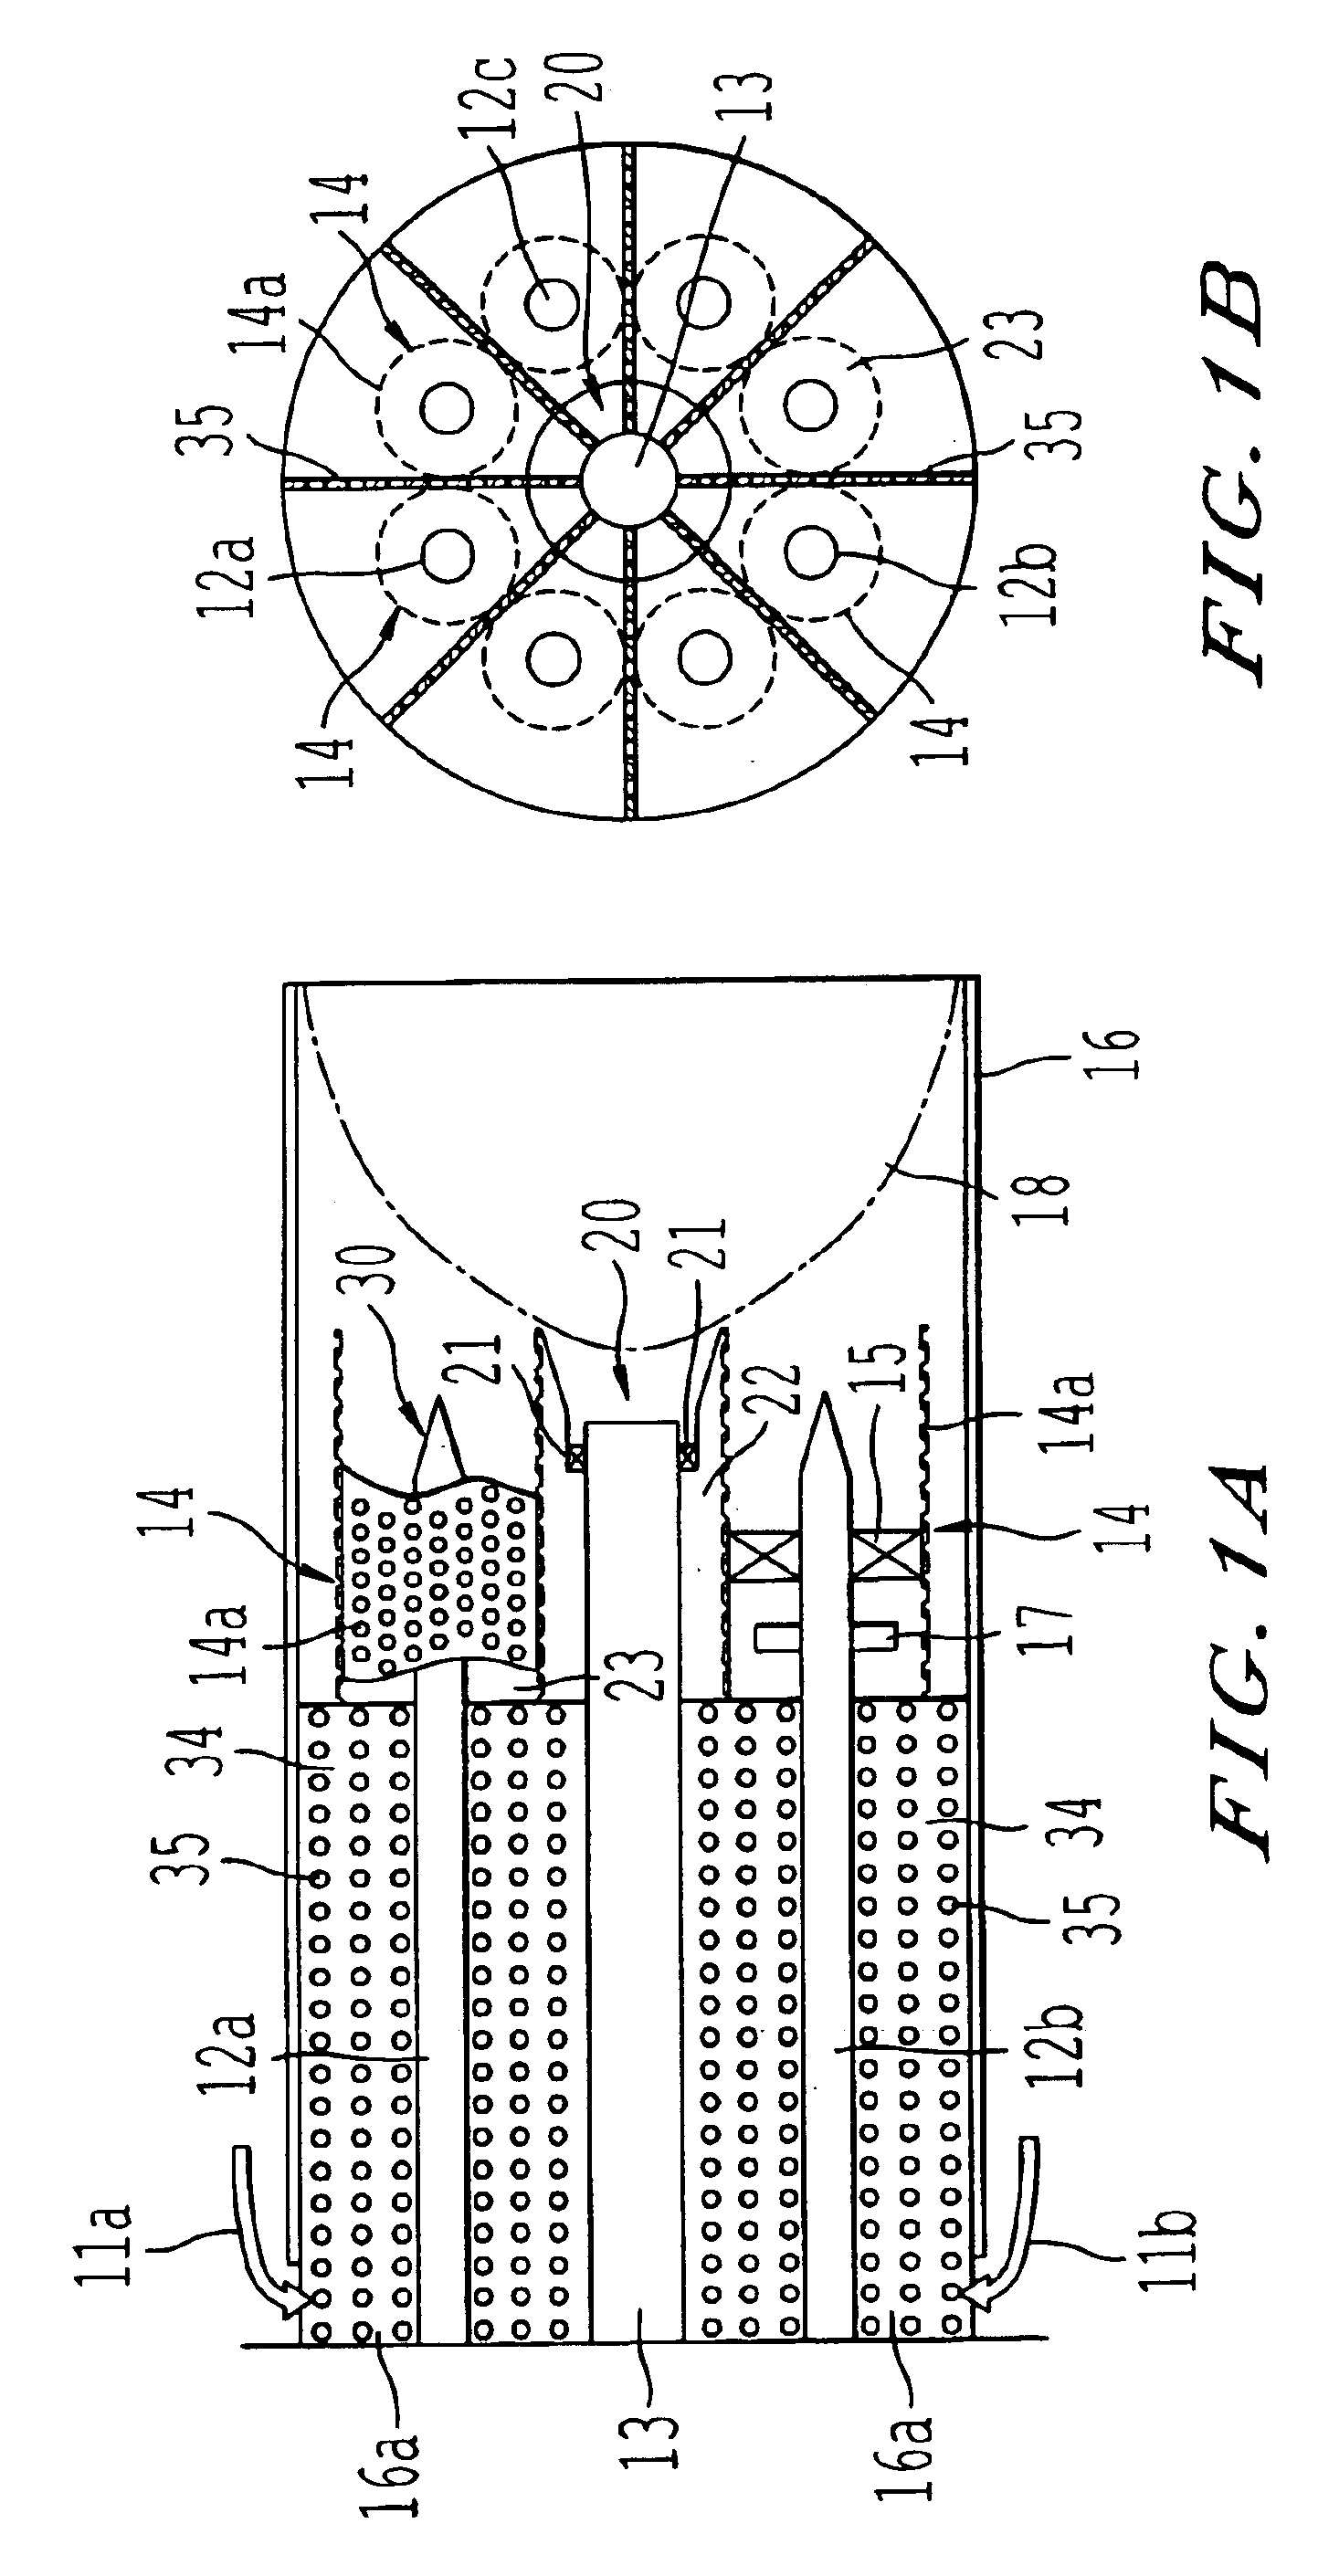 Gas turbine and the combustor thereof